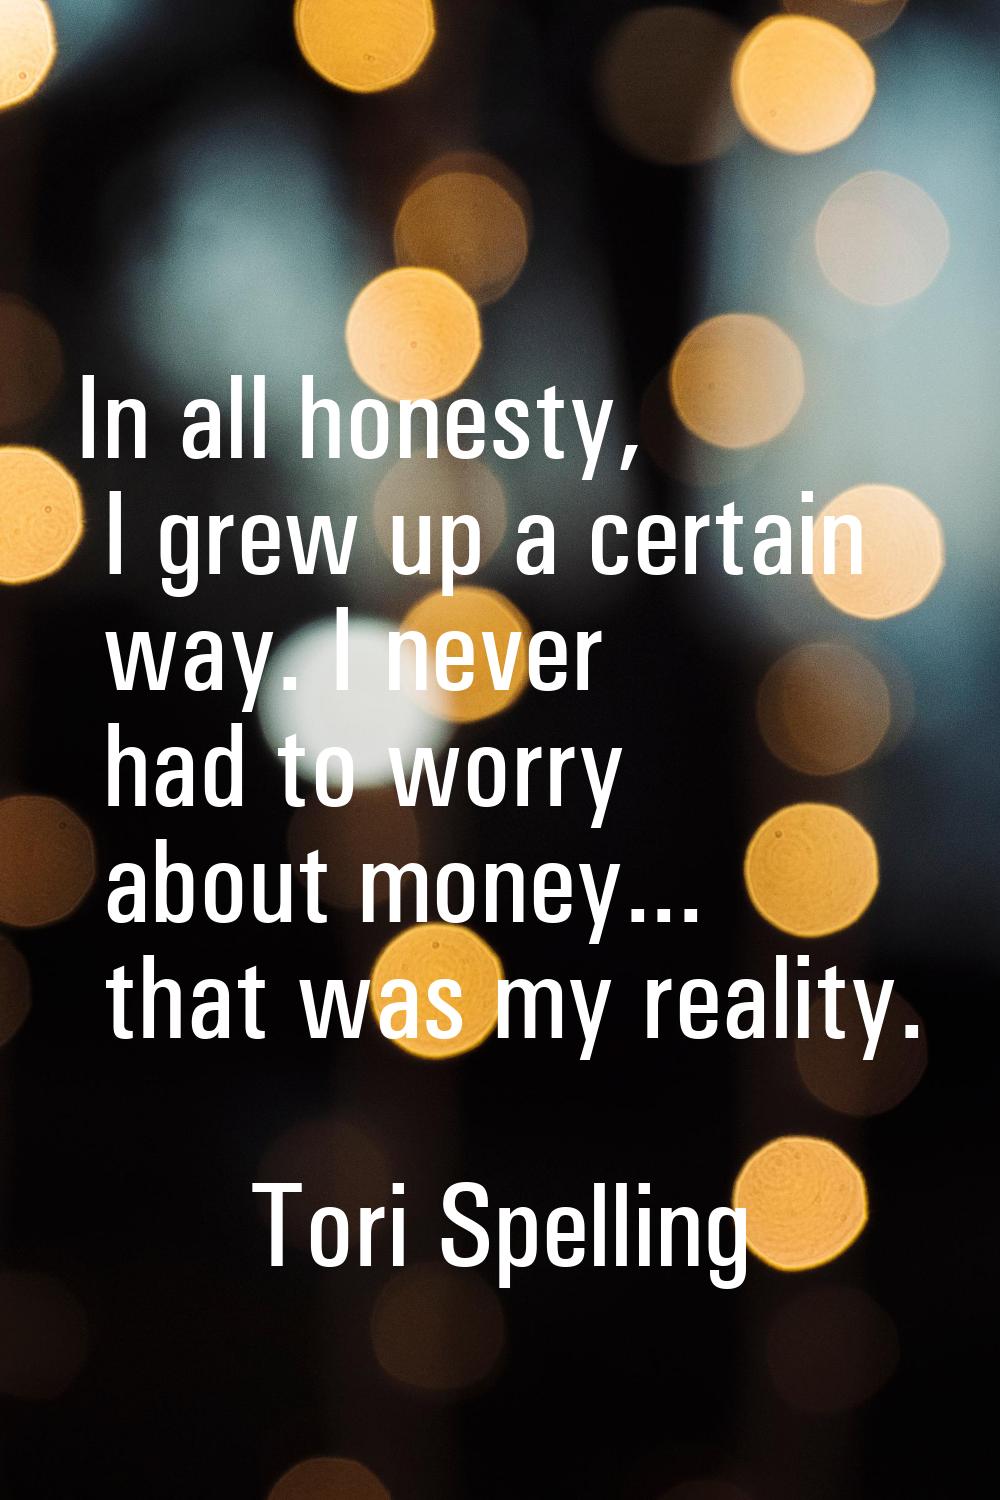 In all honesty, I grew up a certain way. I never had to worry about money... that was my reality.